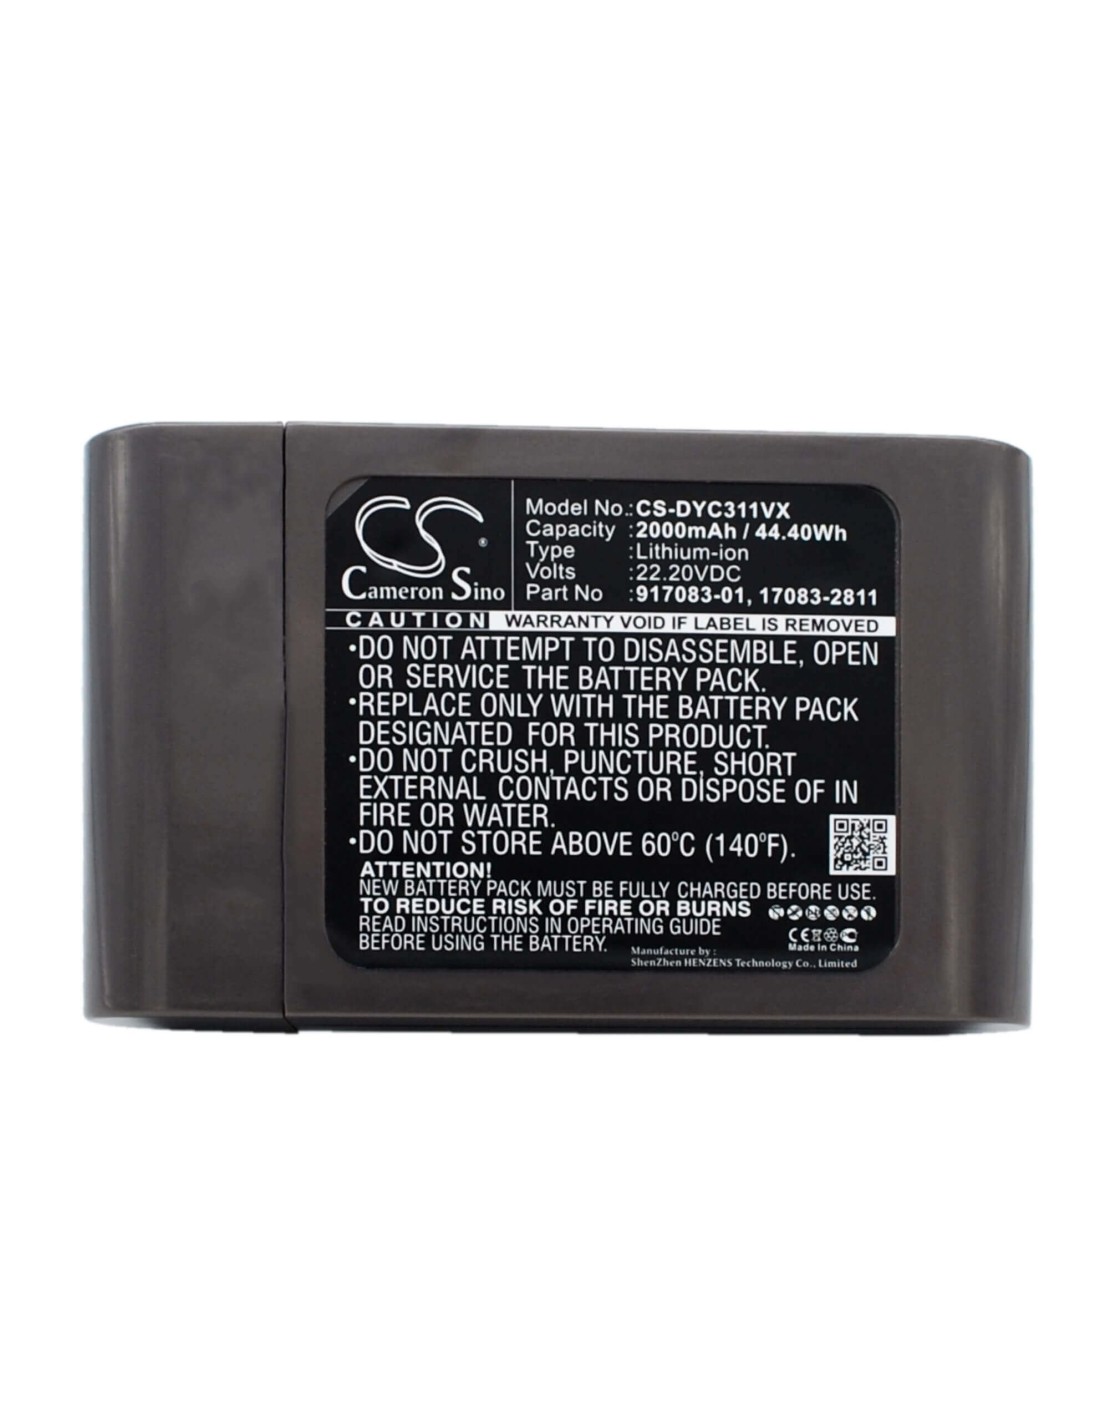 Battery for Dyson Dc31, Dc34, Dc35 22.2V, 2000mAh - 44.40Wh